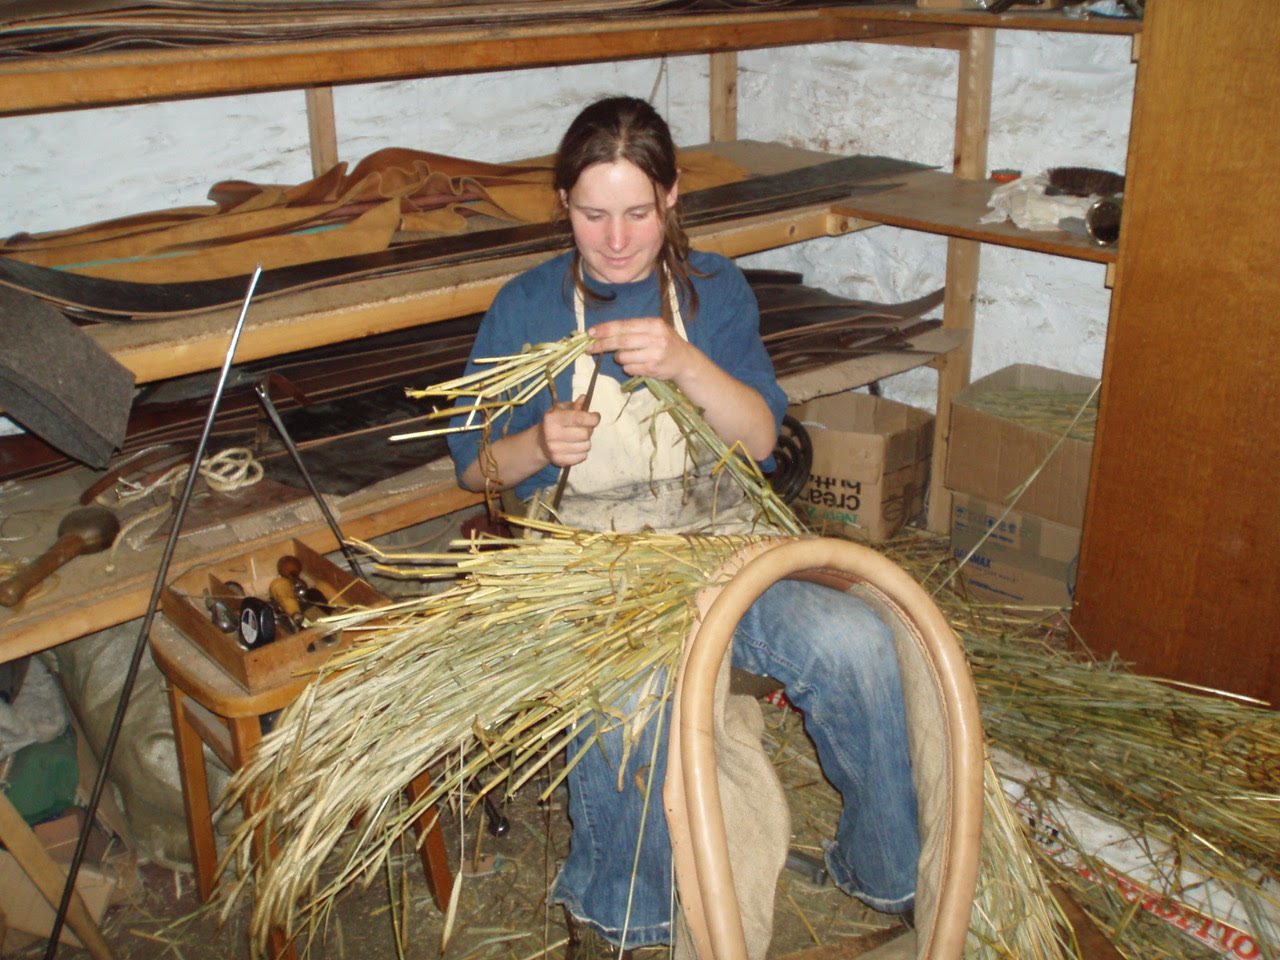 A woman in a blue shirt, white apron and blue jeans sat down, stuffing a leather horse collar with straw.